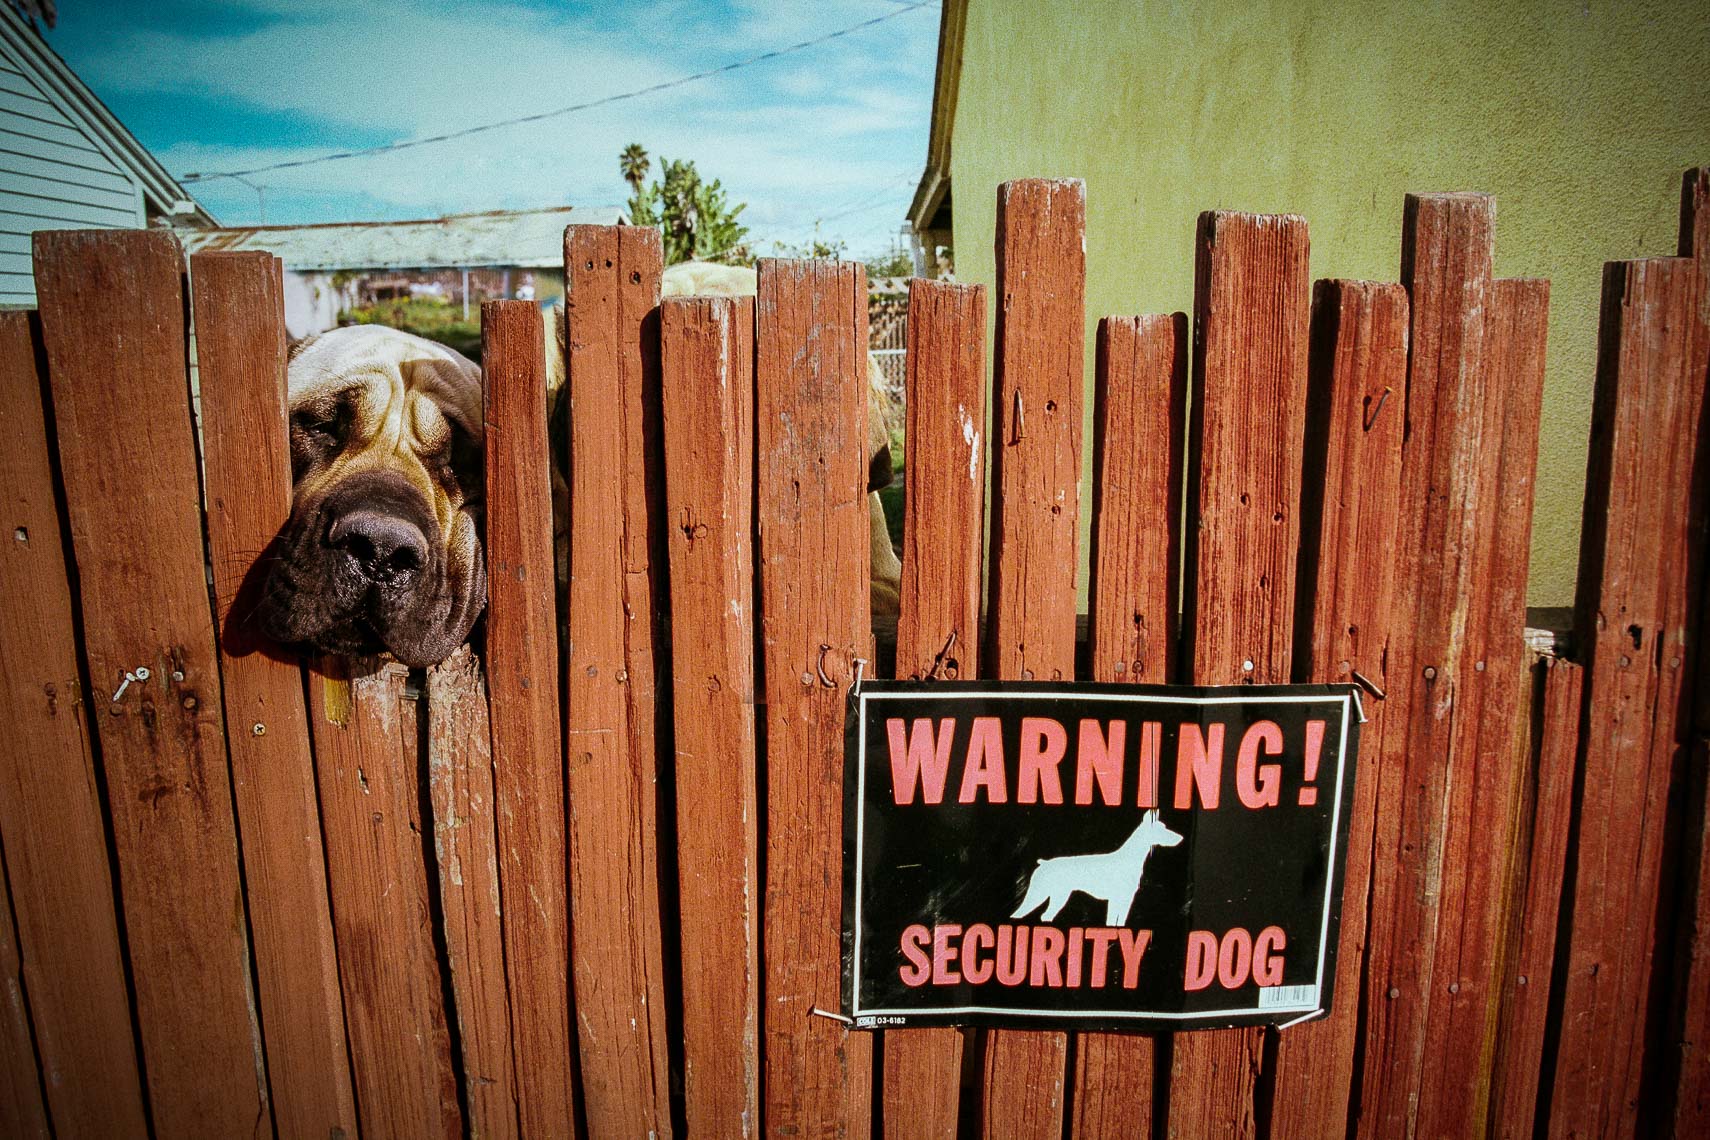 friendly dog peers over fence with warning security dog sign - dog catch dog pound